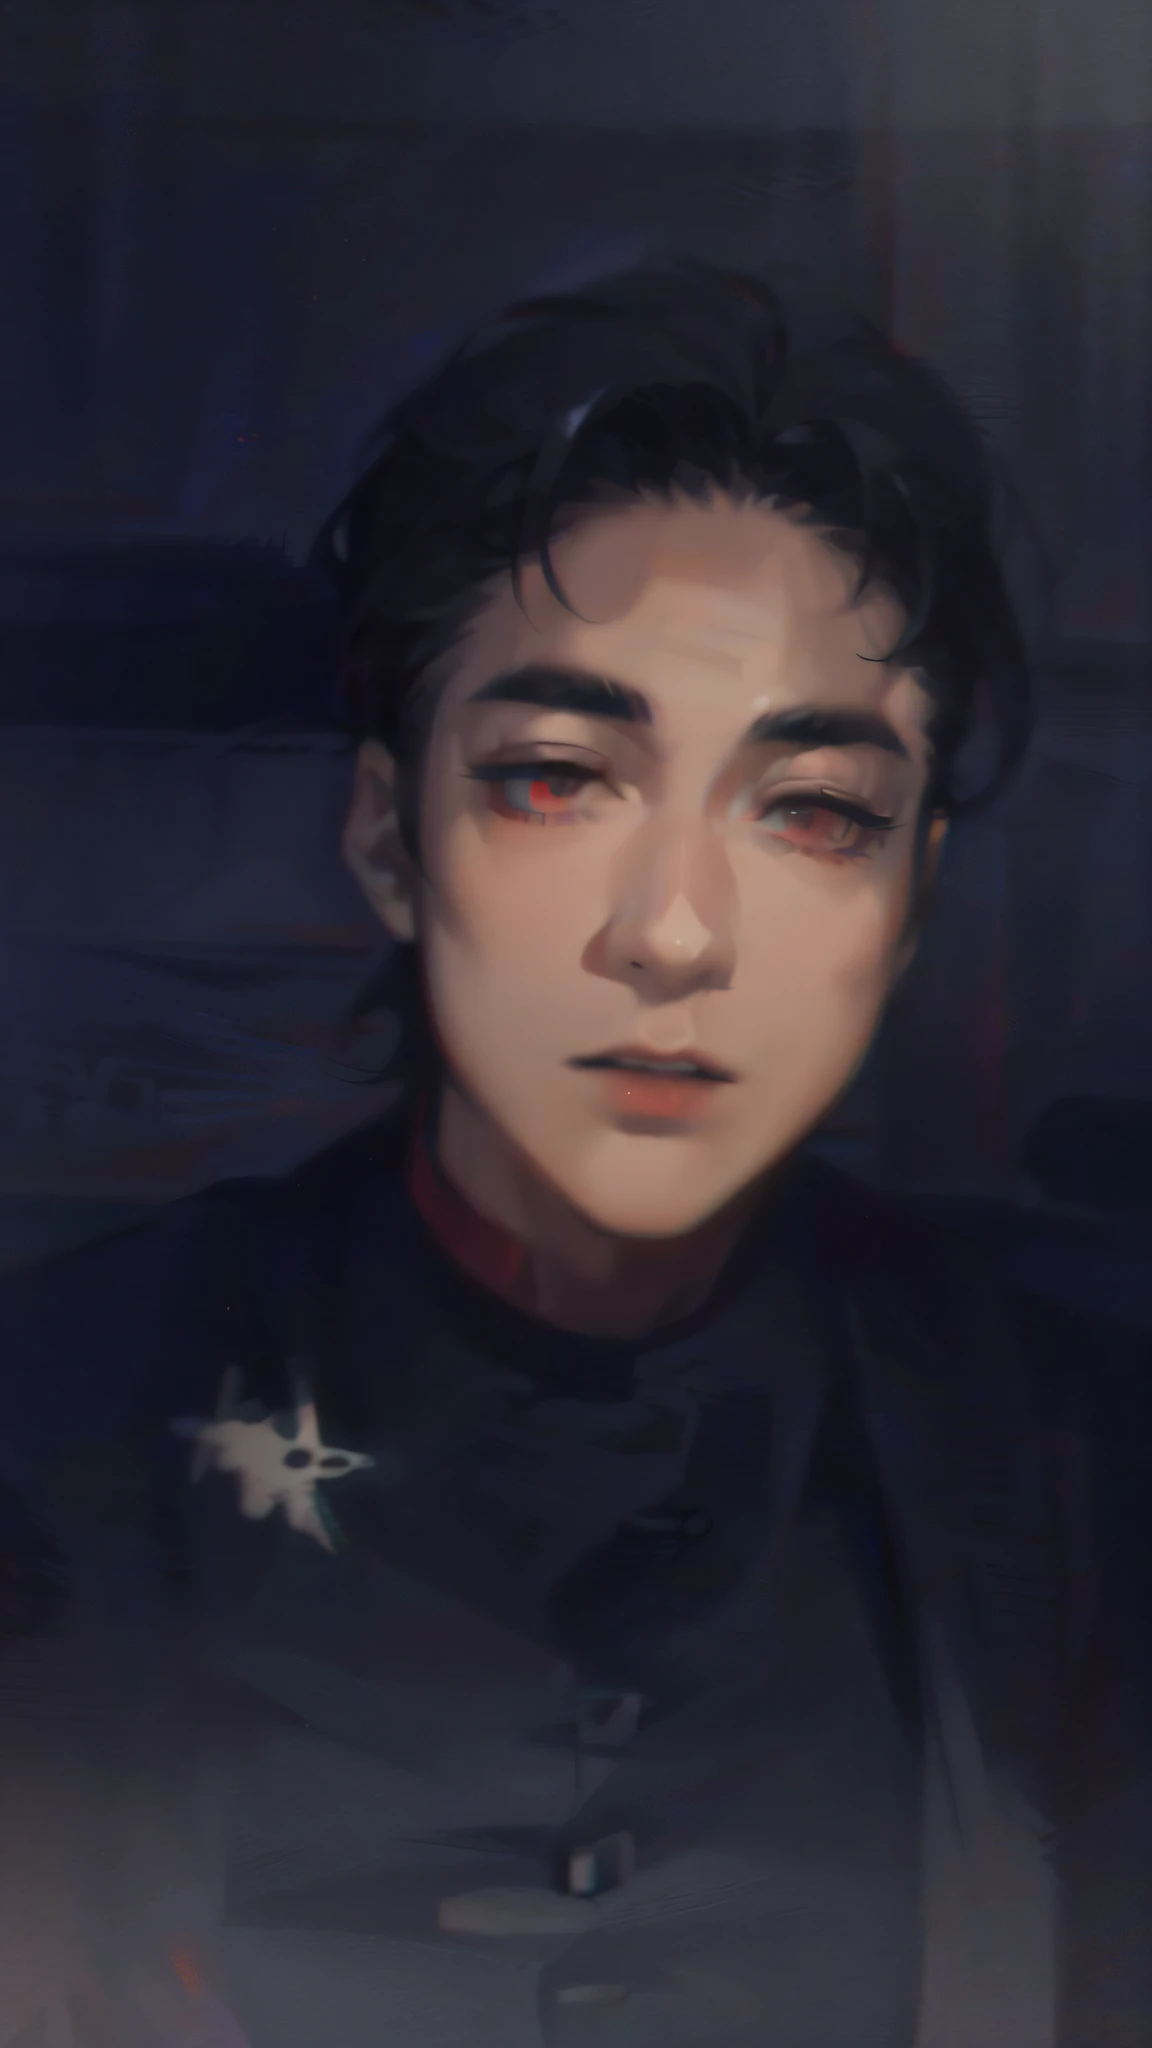 1boy, (close-up face, Masterpiece, Best quality:1.2), 8K, offcial art, absurderes, Gothic, studded black leather jacket and choker, pierced earrings, (smokey red eye shadow with glitter, glazed pinkish red lips:1.1), (Very dark red background:1.4), hdr, facelight, Ultra photo realsisim, A high resolution, Photography, cleavage, filmgrain, color difference, Sharp focus, hdr, facelight, Dynamic lighting, Cinematic lighting, professional shadow, dark shadow, highest details, extreme detailed details, Ultra detailed, finedetail, Real skin, Delicate facial features, Detailed face and eyes, Sharp pupils, Realistic pupils, (Black hair:1.4)